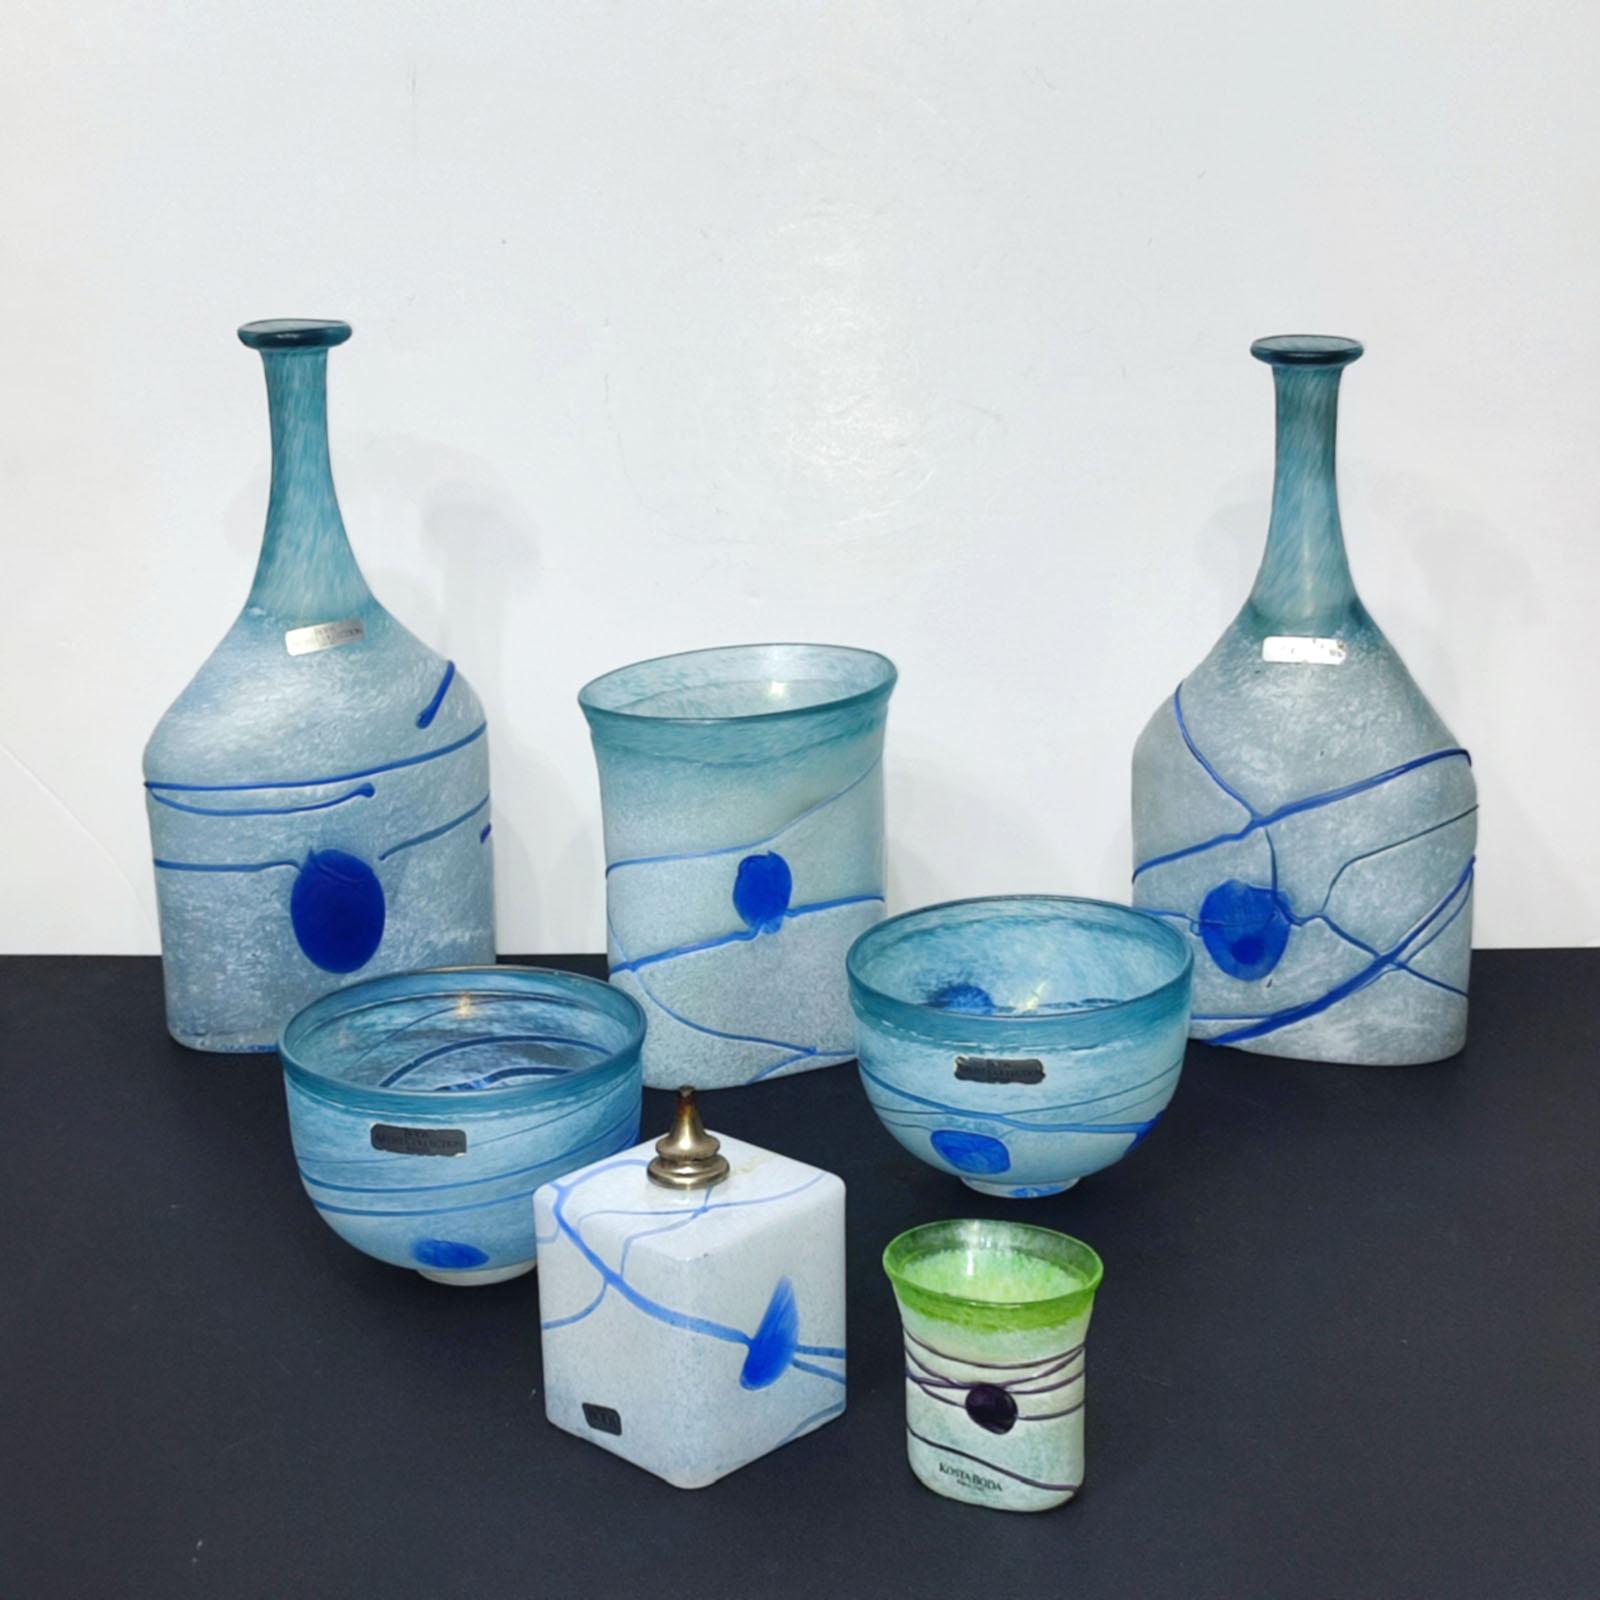 A collection of seven glass pieces by Bertil Vallien for Kosta Boda.
From the one of the most well-known series - Galaxy Blue from 1982. 
It consists of 7 objects with blue threads and dots on a white surface.
2 Bottle Vases (model 48015), height